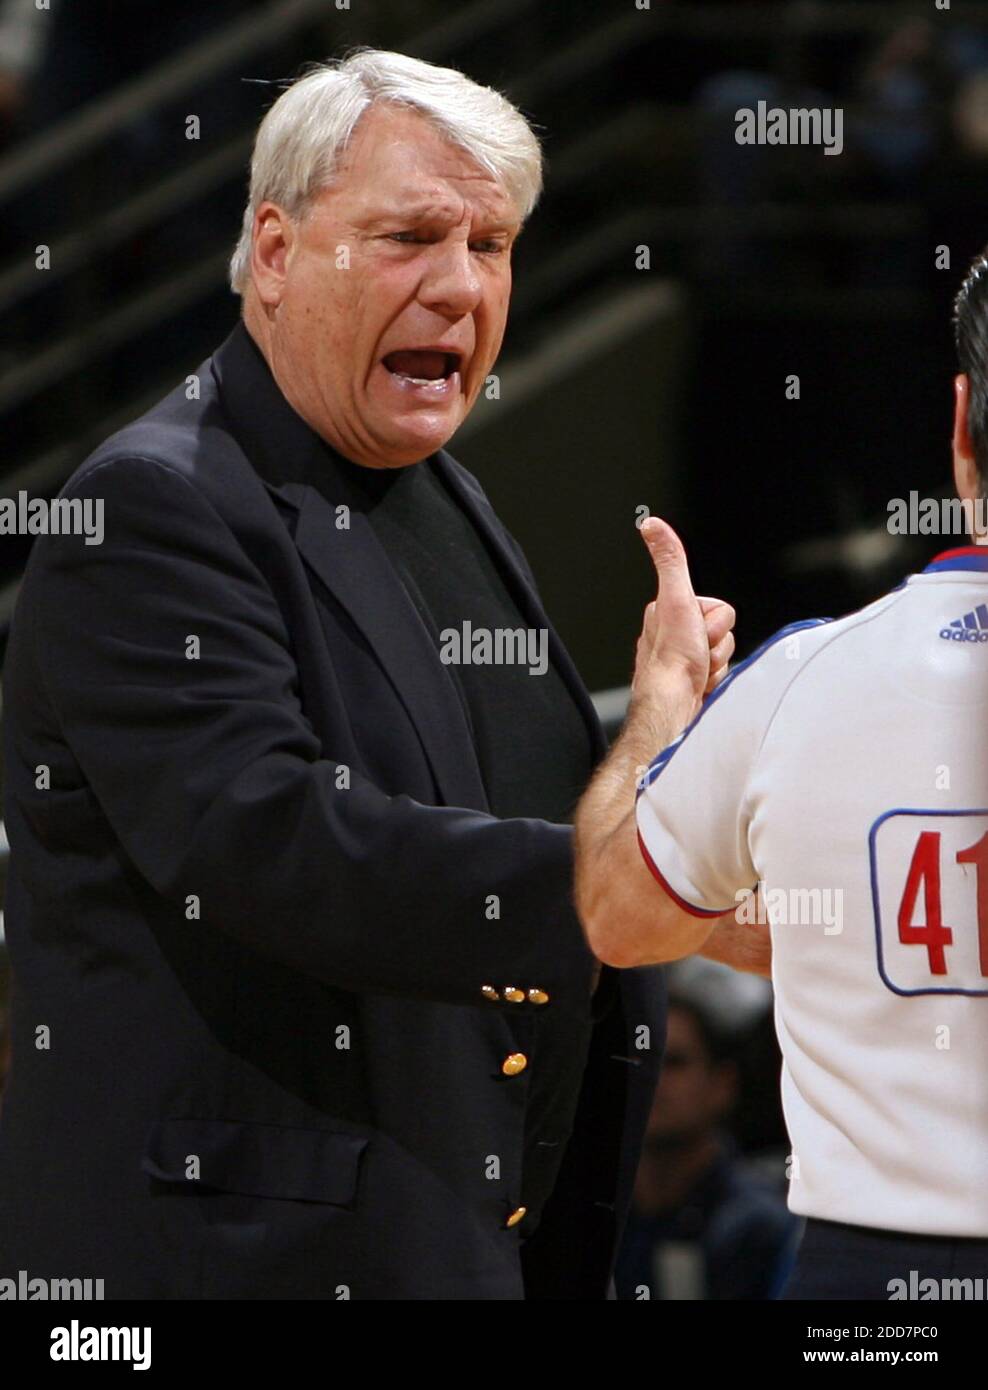 Golden State Warriors coach Don Nelson yells at game official Ken Mauer during game action against the Orlando Magic at Amway Arena in Orlando, FL, USA on March 8, 2008. Golden State Warriors won 104-95. Photo by Stephen M. Dowell/Orlando Sentinel/MCT/Cameleon/ABACAPRESS.COM Stock Photo